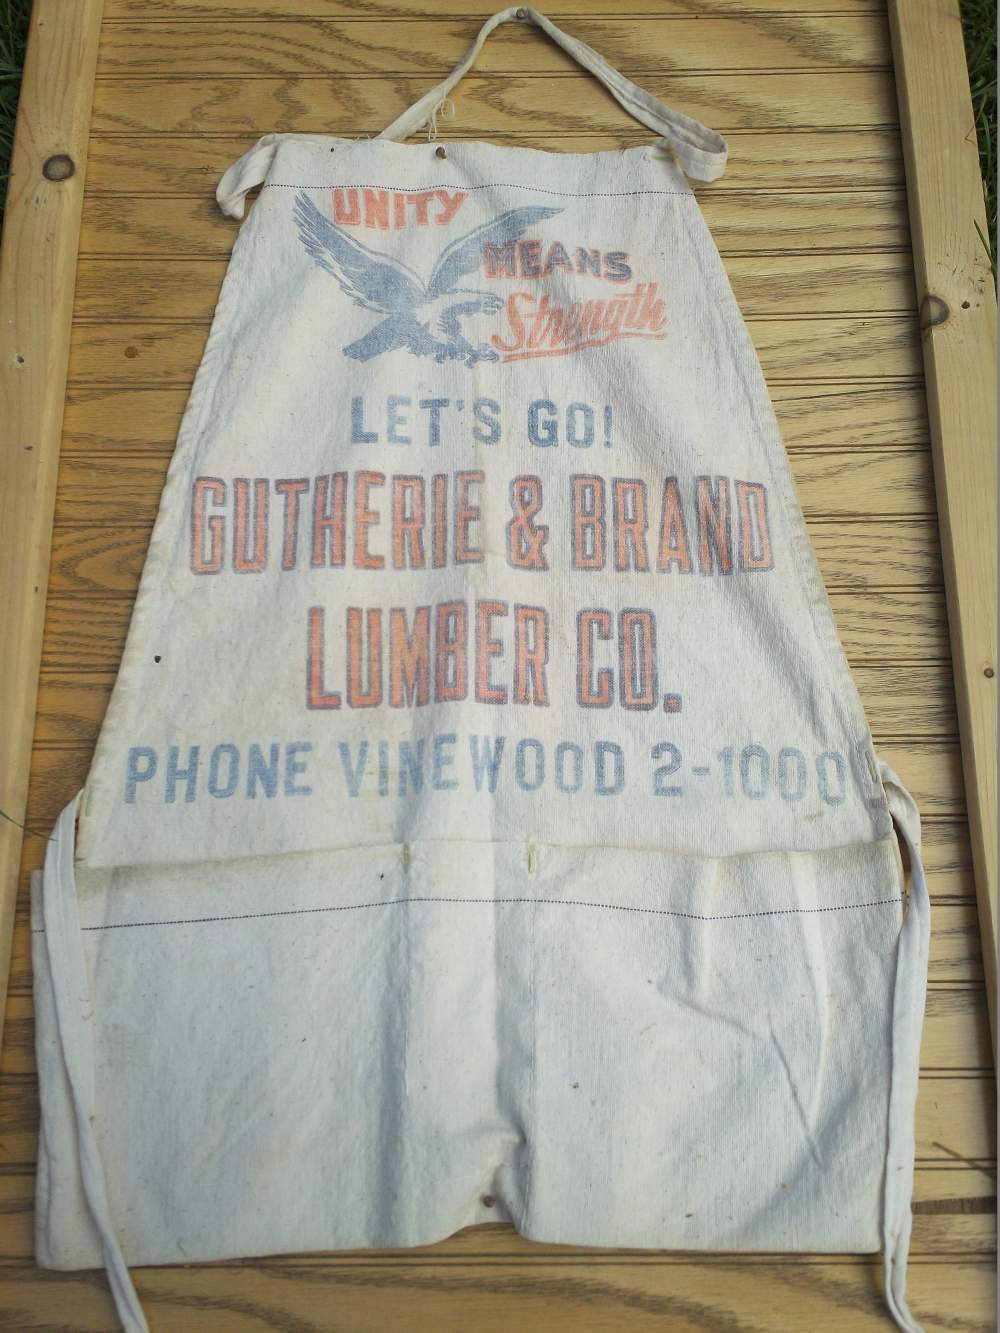 Name:  GLC Gutherie and Brand Lumber.jpg
Views: 802
Size:  142.7 KB